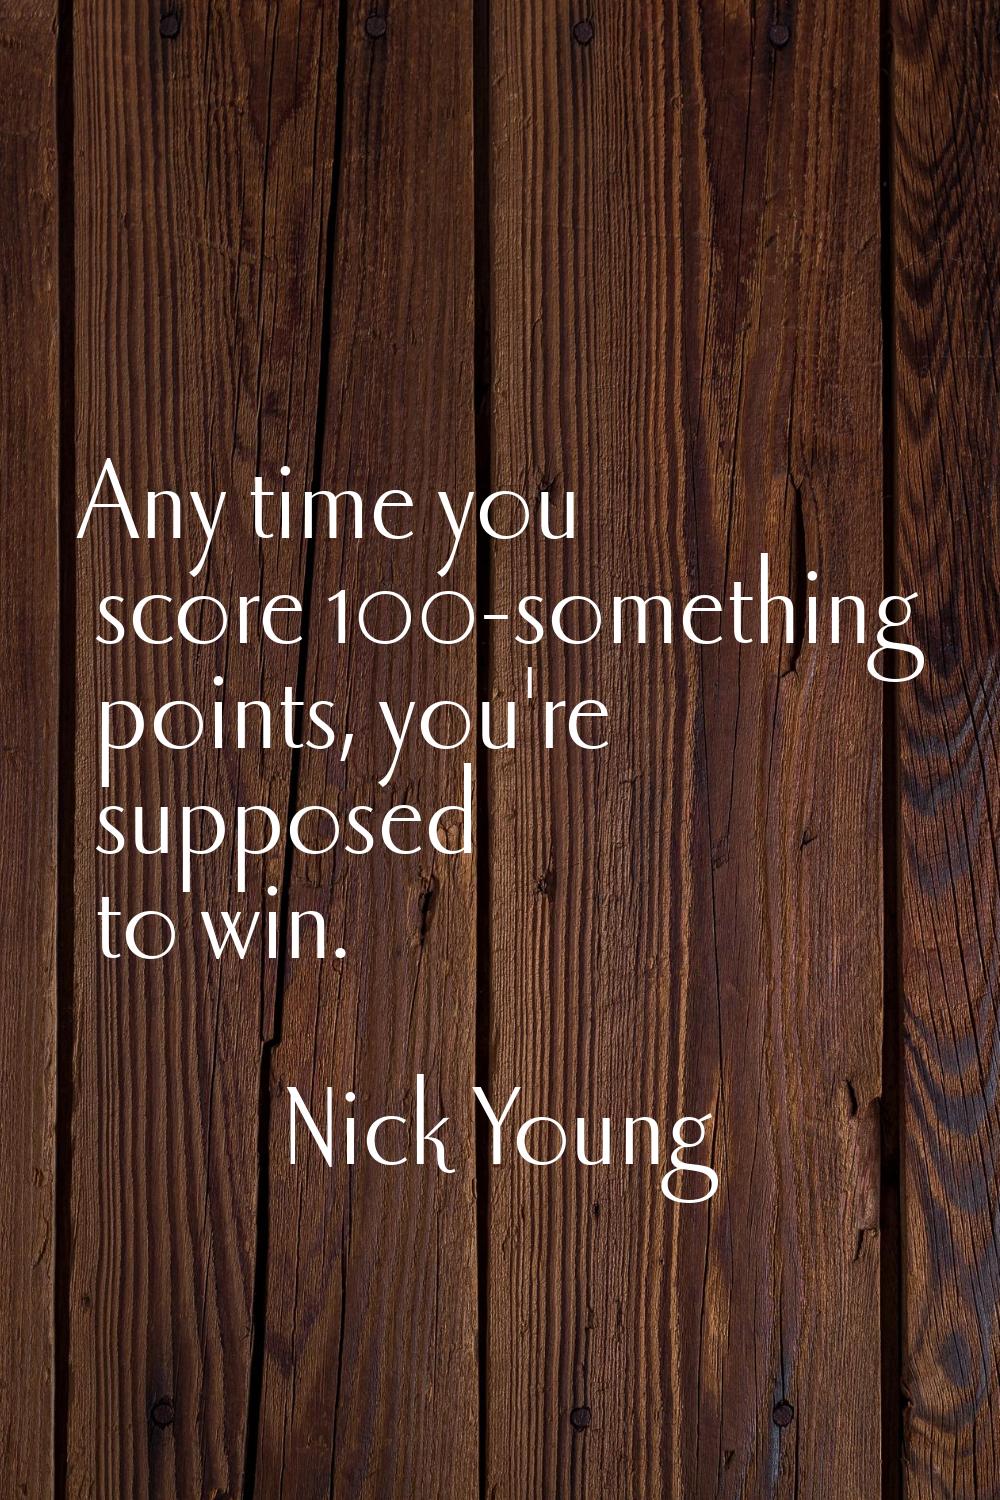 Any time you score 100-something points, you're supposed to win.